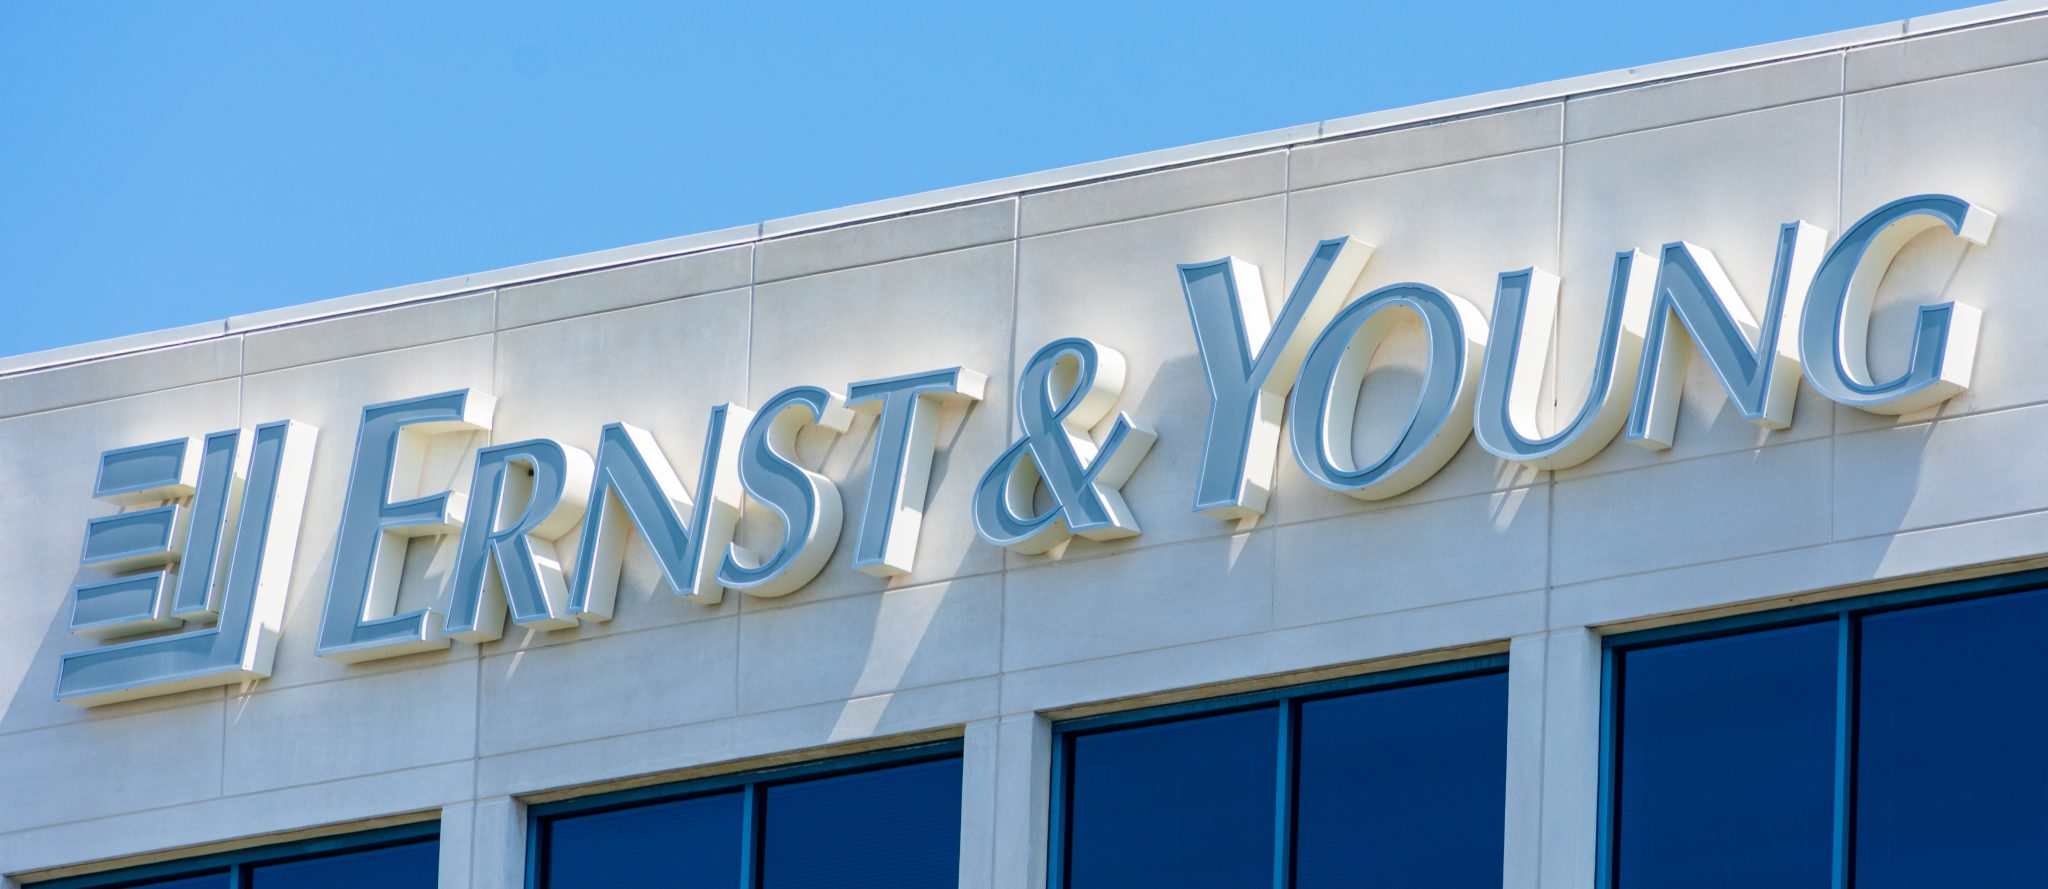 Ernst and Young logo atop of a multinational professional services firm office in Silicon Valley, high-tech hub of San Francisco Bay Area - Redwood City, California, USA - 2019